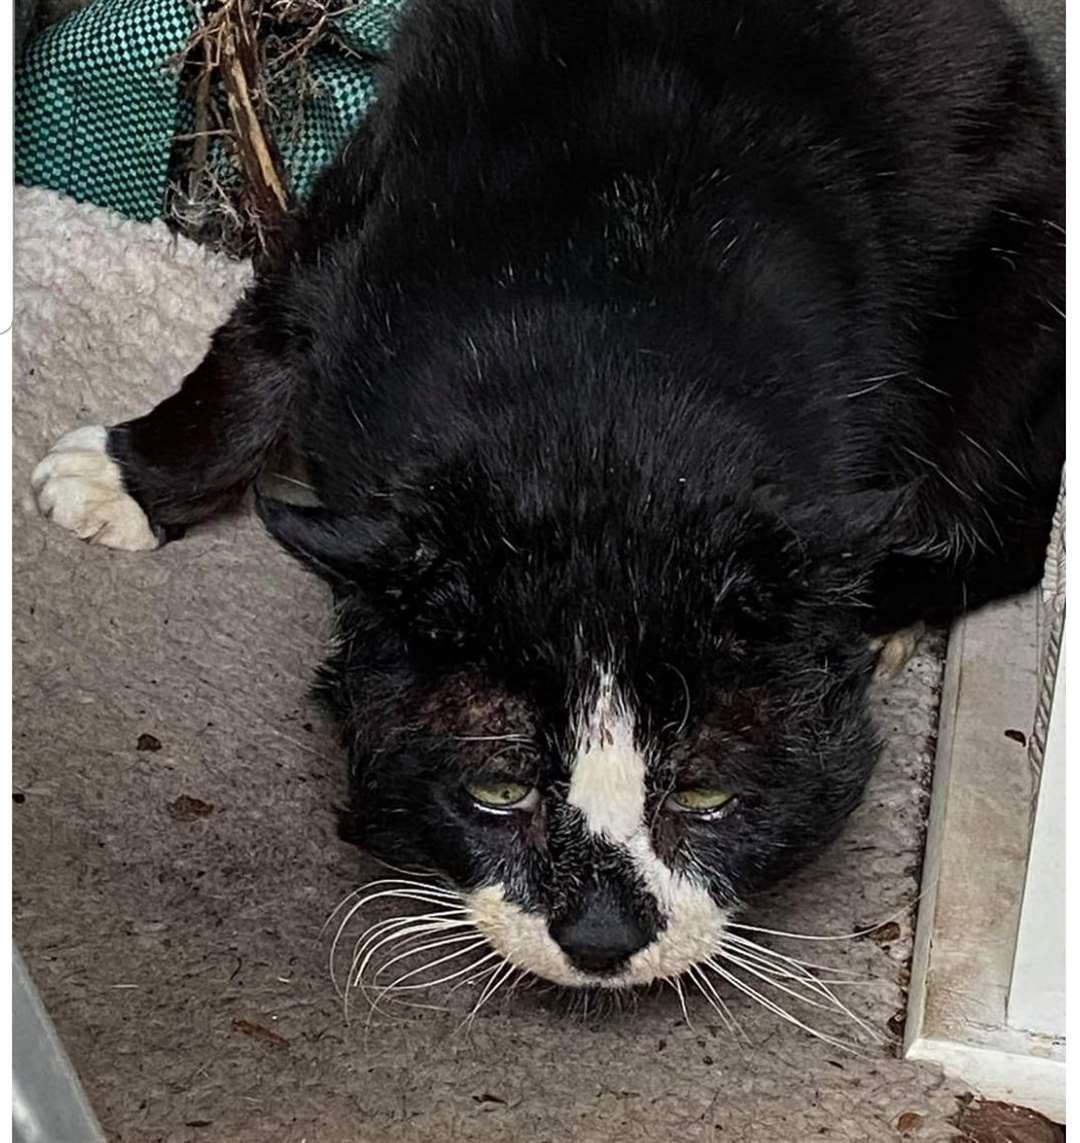 A cat found with bite marks and puncture wounds that sadly had to be put down